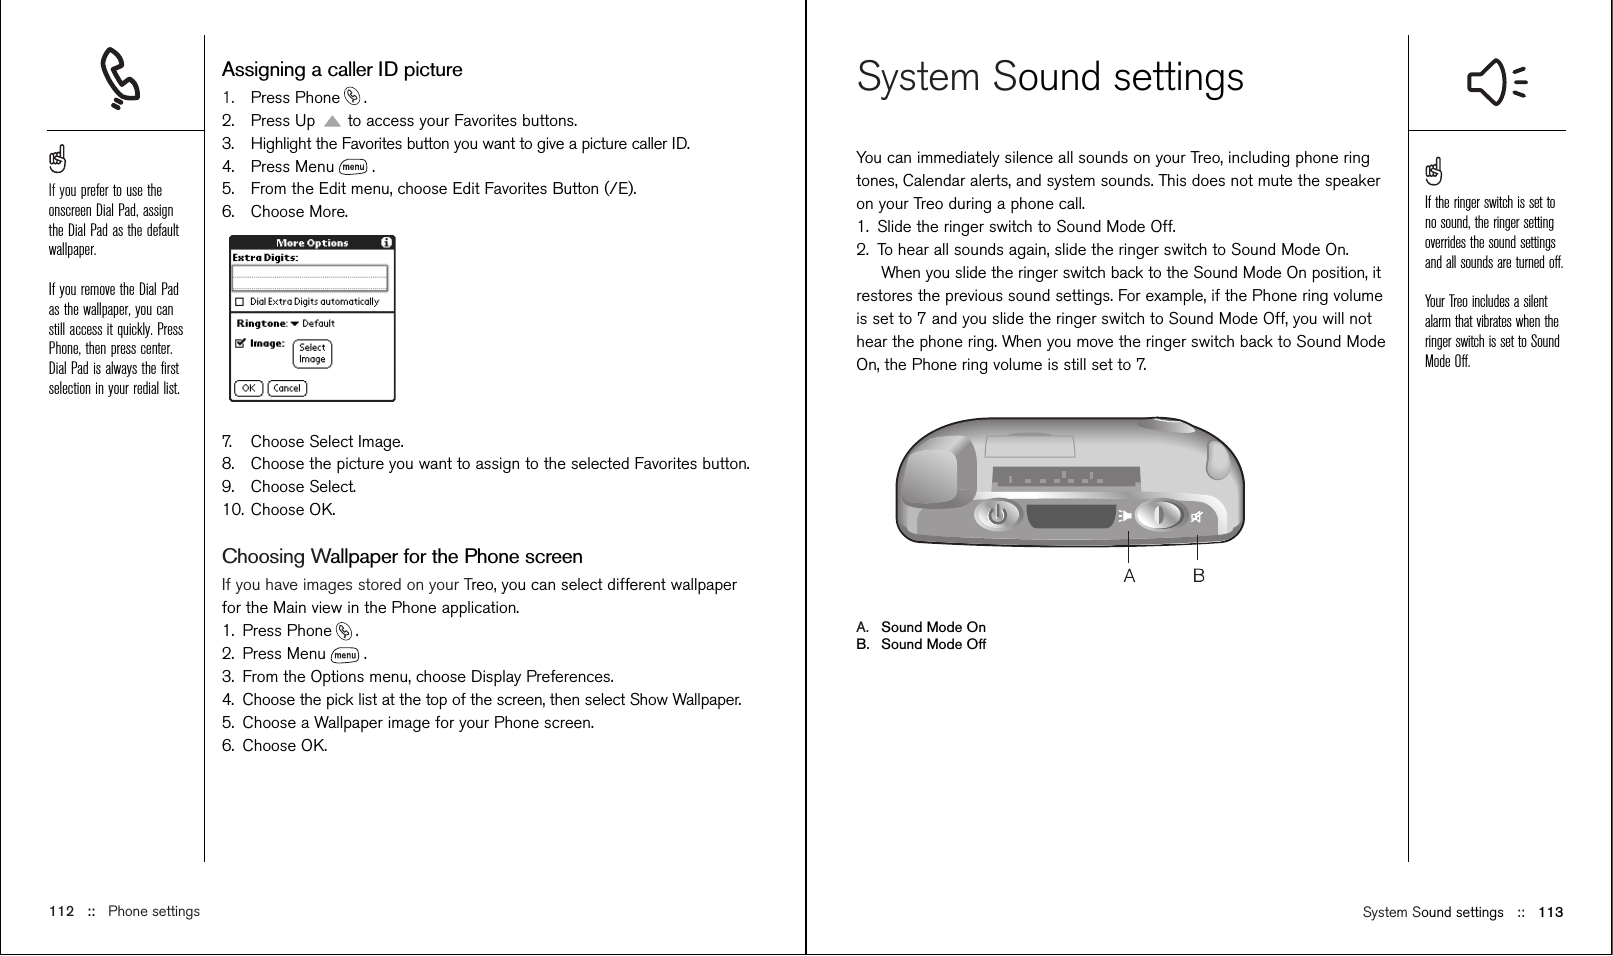 System Sound settings ::   113System Sound settingsYou can immediately silence all sounds on your Treo, including phone ringtones, Calendar alerts, and system sounds. This does not mute the speakeron your Treo during a phone call.1. Slide the ringer switch to Sound Mode Off.2. To hear all sounds again, slide the ringer switch to Sound Mode On.When you slide the ringer switch back to the Sound Mode On position, itrestores the previous sound settings. For example, if the Phone ring volumeis set to 7 and you slide the ringer switch to Sound Mode Off, you will nothear the phone ring. When you move the ringer switch back to Sound ModeOn, the Phone ring volume is still set to 7.A. Sound Mode OnB. Sound Mode OffAssigning a caller ID picture1. Press Phone .2. Press Up to access your Favorites buttons. 3. Highlight the Favorites button you want to give a picture caller ID.4. Press Menu .5. From the Edit menu, choose Edit Favorites Button (/E).6. Choose More.7. Choose Select Image. 8. Choose the picture you want to assign to the selected Favorites button. 9. Choose Select.10. Choose OK.Choosing Wallpaper for the Phone screenIf you have images stored on your Treo, you can select different wallpaperfor the Main view in the Phone application.1. Press Phone .2. Press Menu .3. From the Options menu, choose Display Preferences.4. Choose the pick list at the top of the screen, then select Show Wallpaper.5. Choose a Wallpaper image for your Phone screen.6. Choose OK.112 ::   Phone settingsIf you prefer to use theonscreen Dial Pad, assignthe Dial Pad as the defaultwallpaper.If you remove the Dial Padas the wallpaper, you canstill access it quickly. PressPhone, then press center.Dial Pad is always the ﬁrstselection in your redial list.If the ringer switch is set tono sound, the ringer settingoverrides the sound settingsand all sounds are turned off.Your Treo includes a silentalarm that vibrates when theringer switch is set to SoundMode Off. 